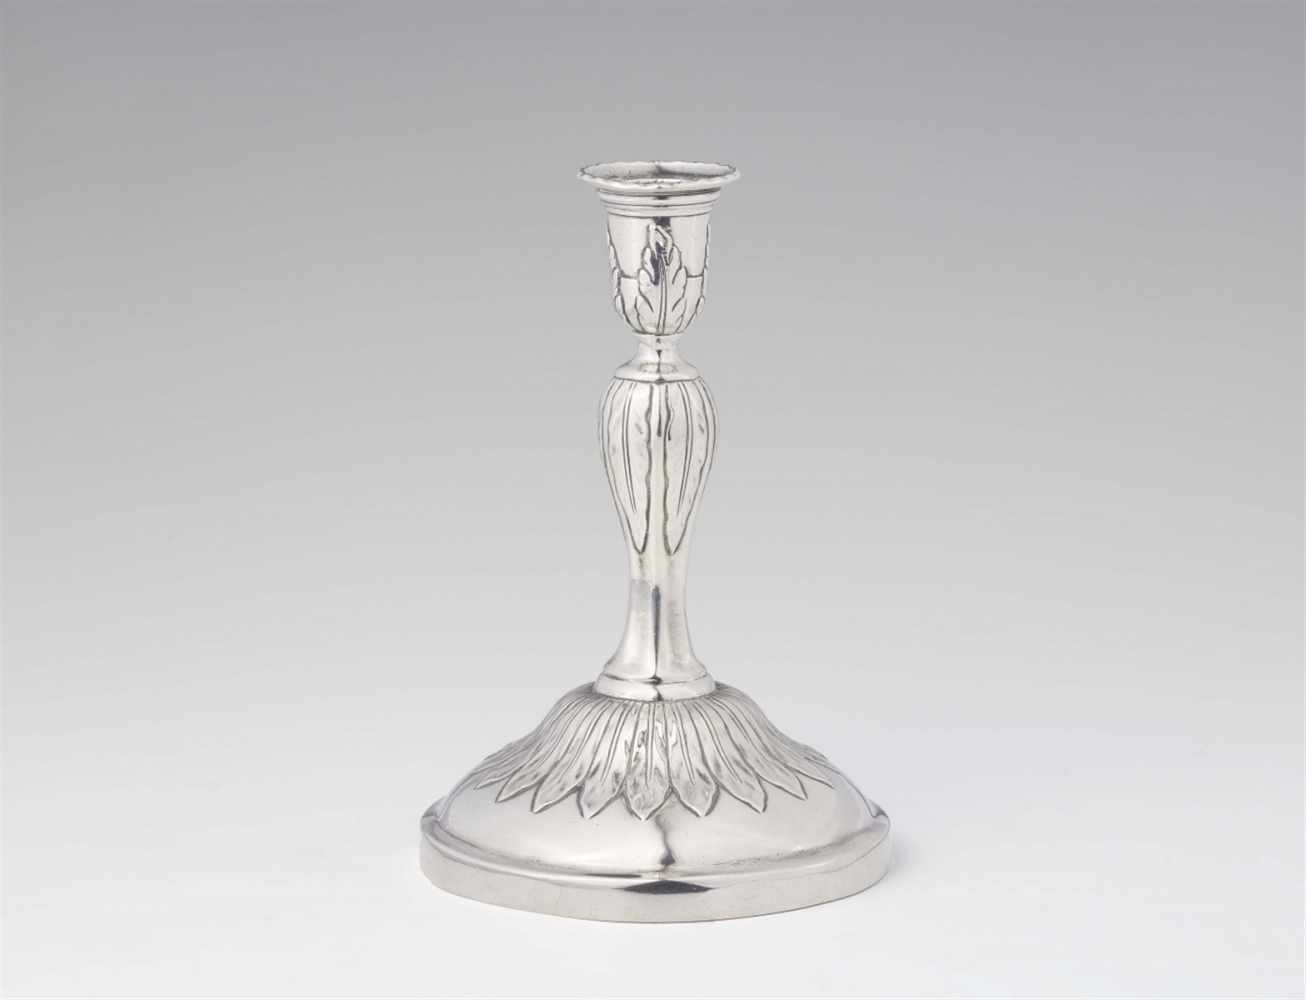 A silver candlestick from the court silver of DresdenBaluster form candlestick decorated with a